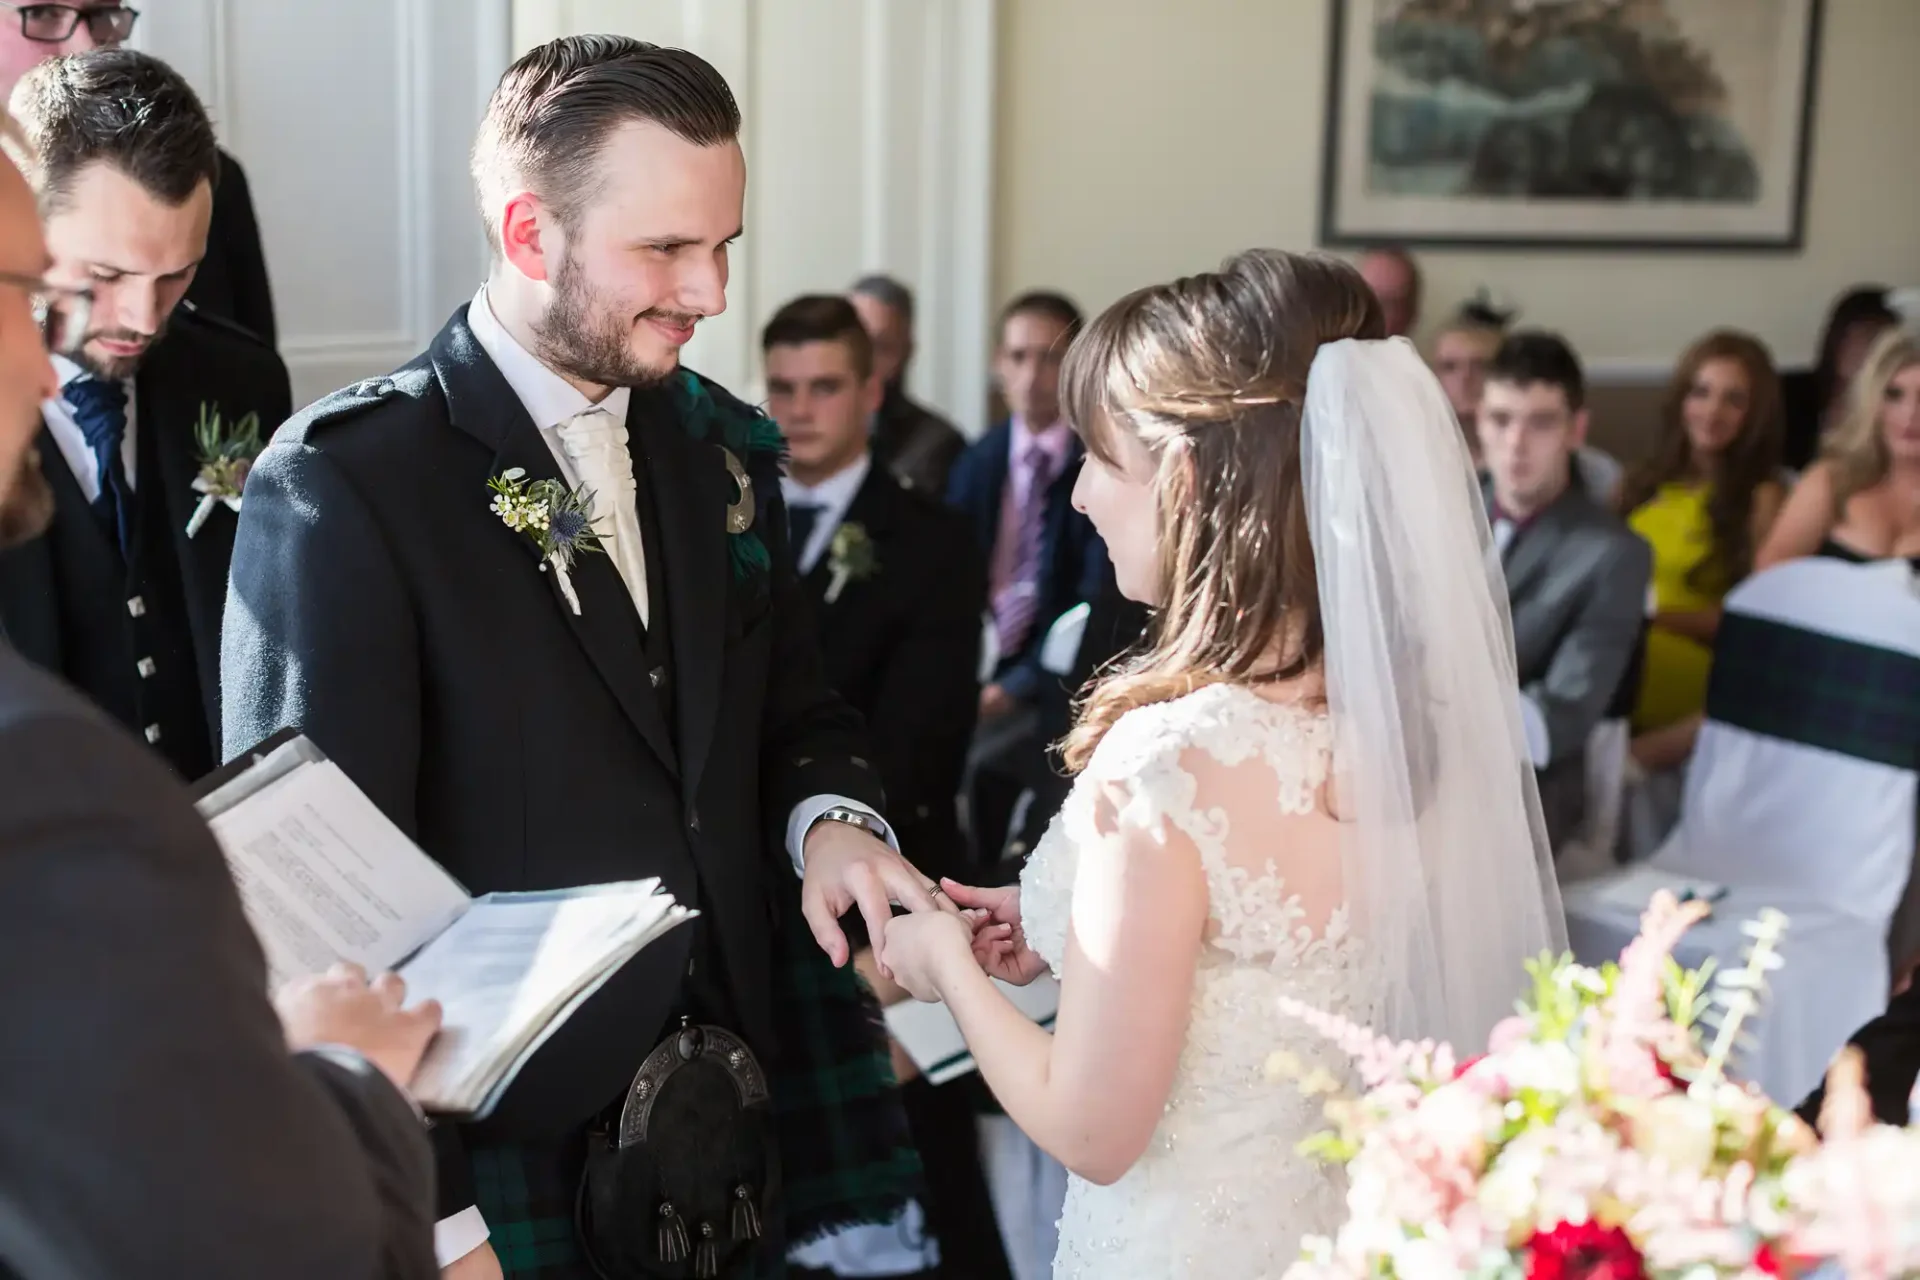 Bride and groom exchanging rings during a wedding ceremony in a room filled with guests, the groom wearing a kilt.